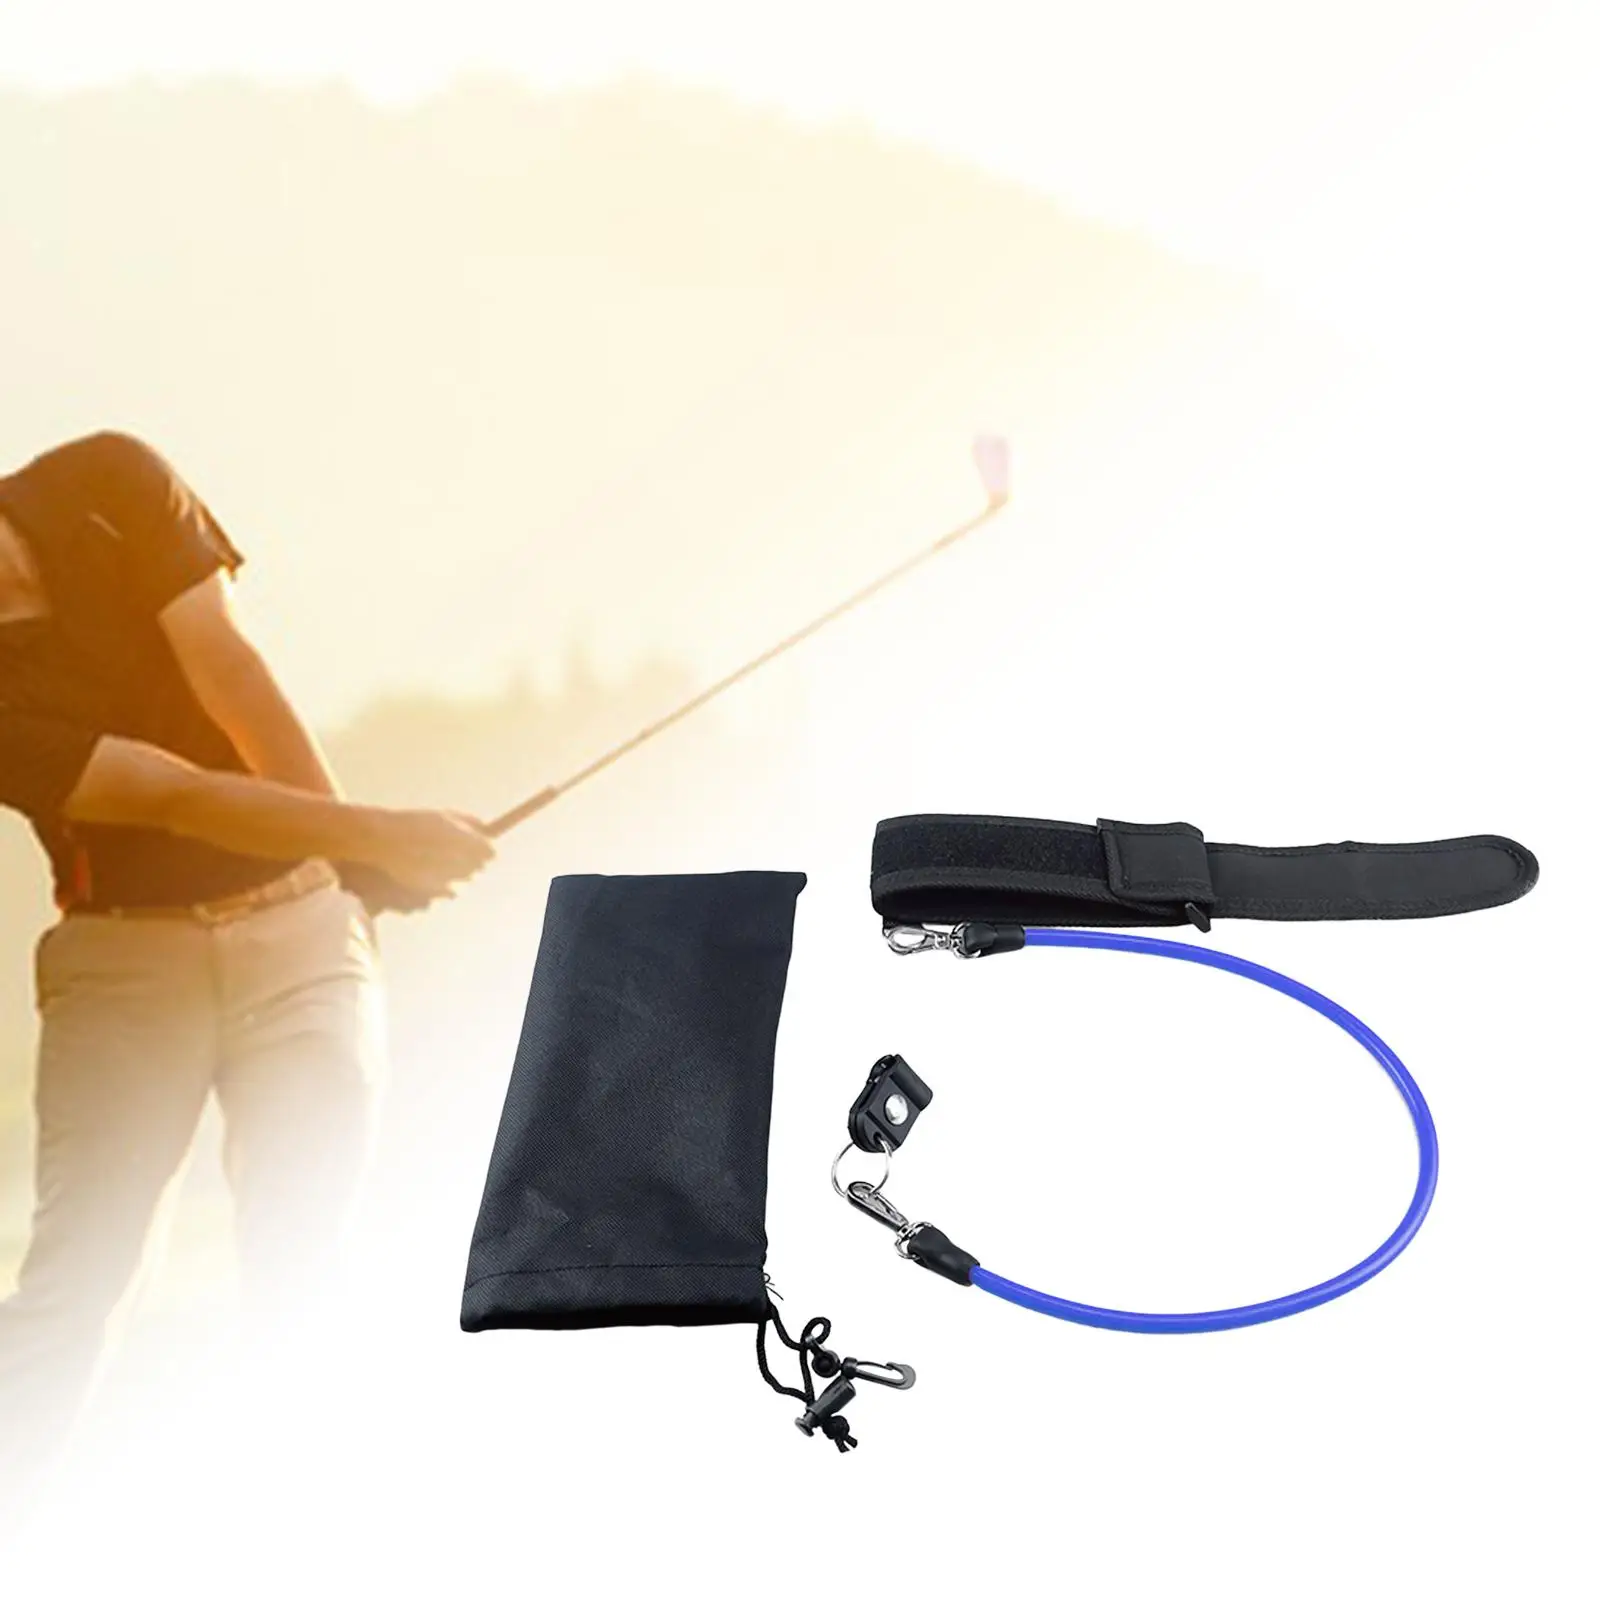 Golf Swing Release Trainer Portable for Teaching Posture Strength Training